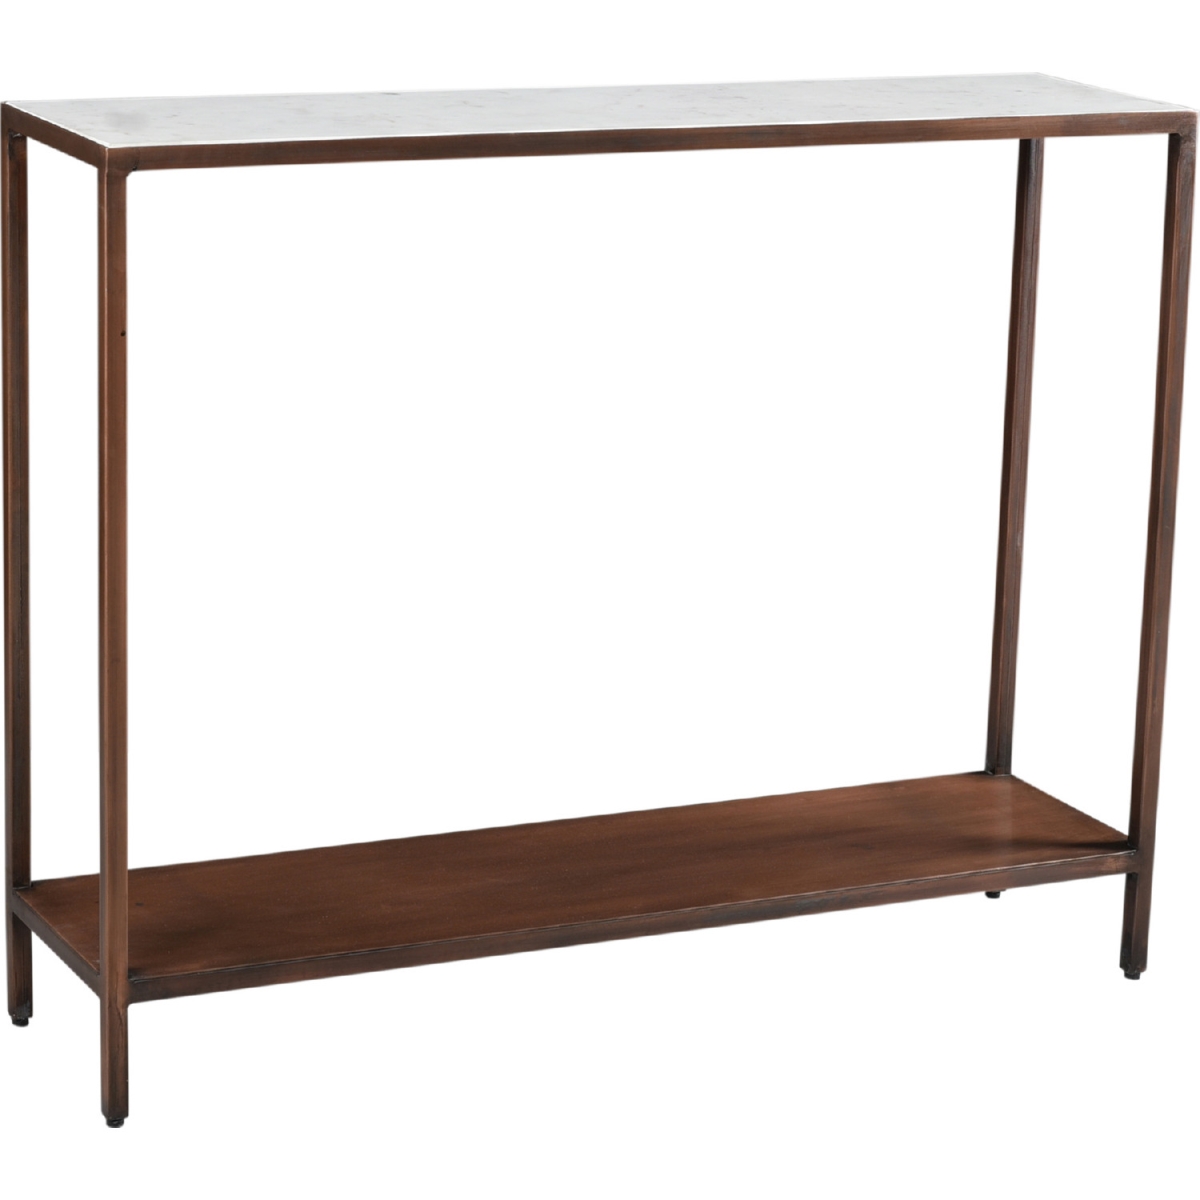 Dr-1320-50 Bottego Console Table - Antique Copper, 32 X 42 X 10 In.